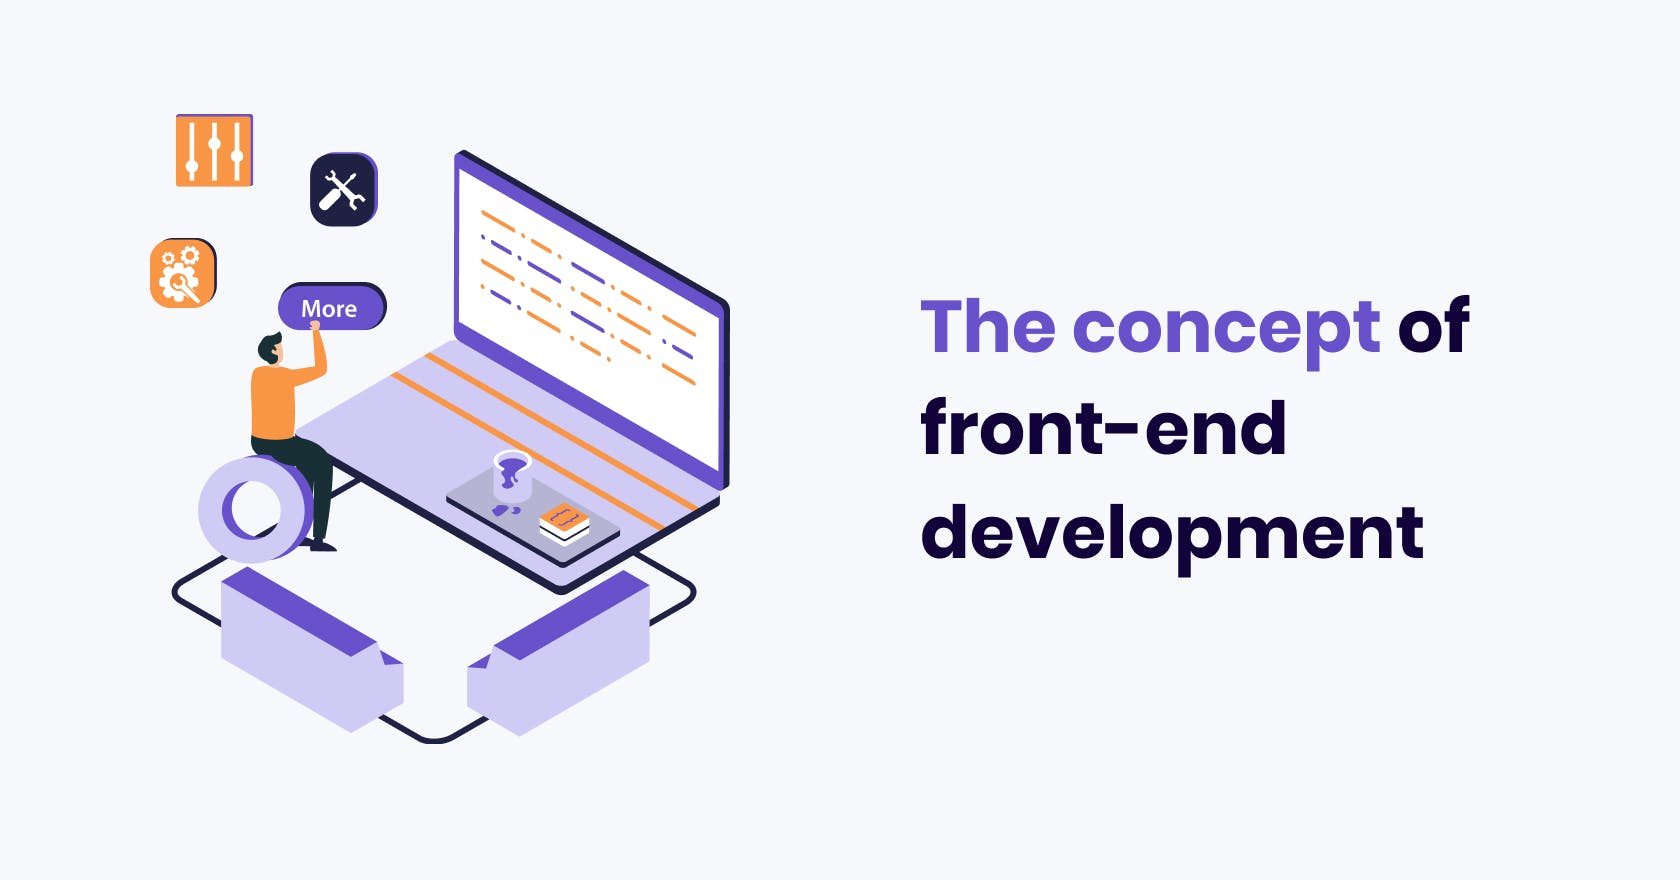 Nightborn - The concept of front-end development